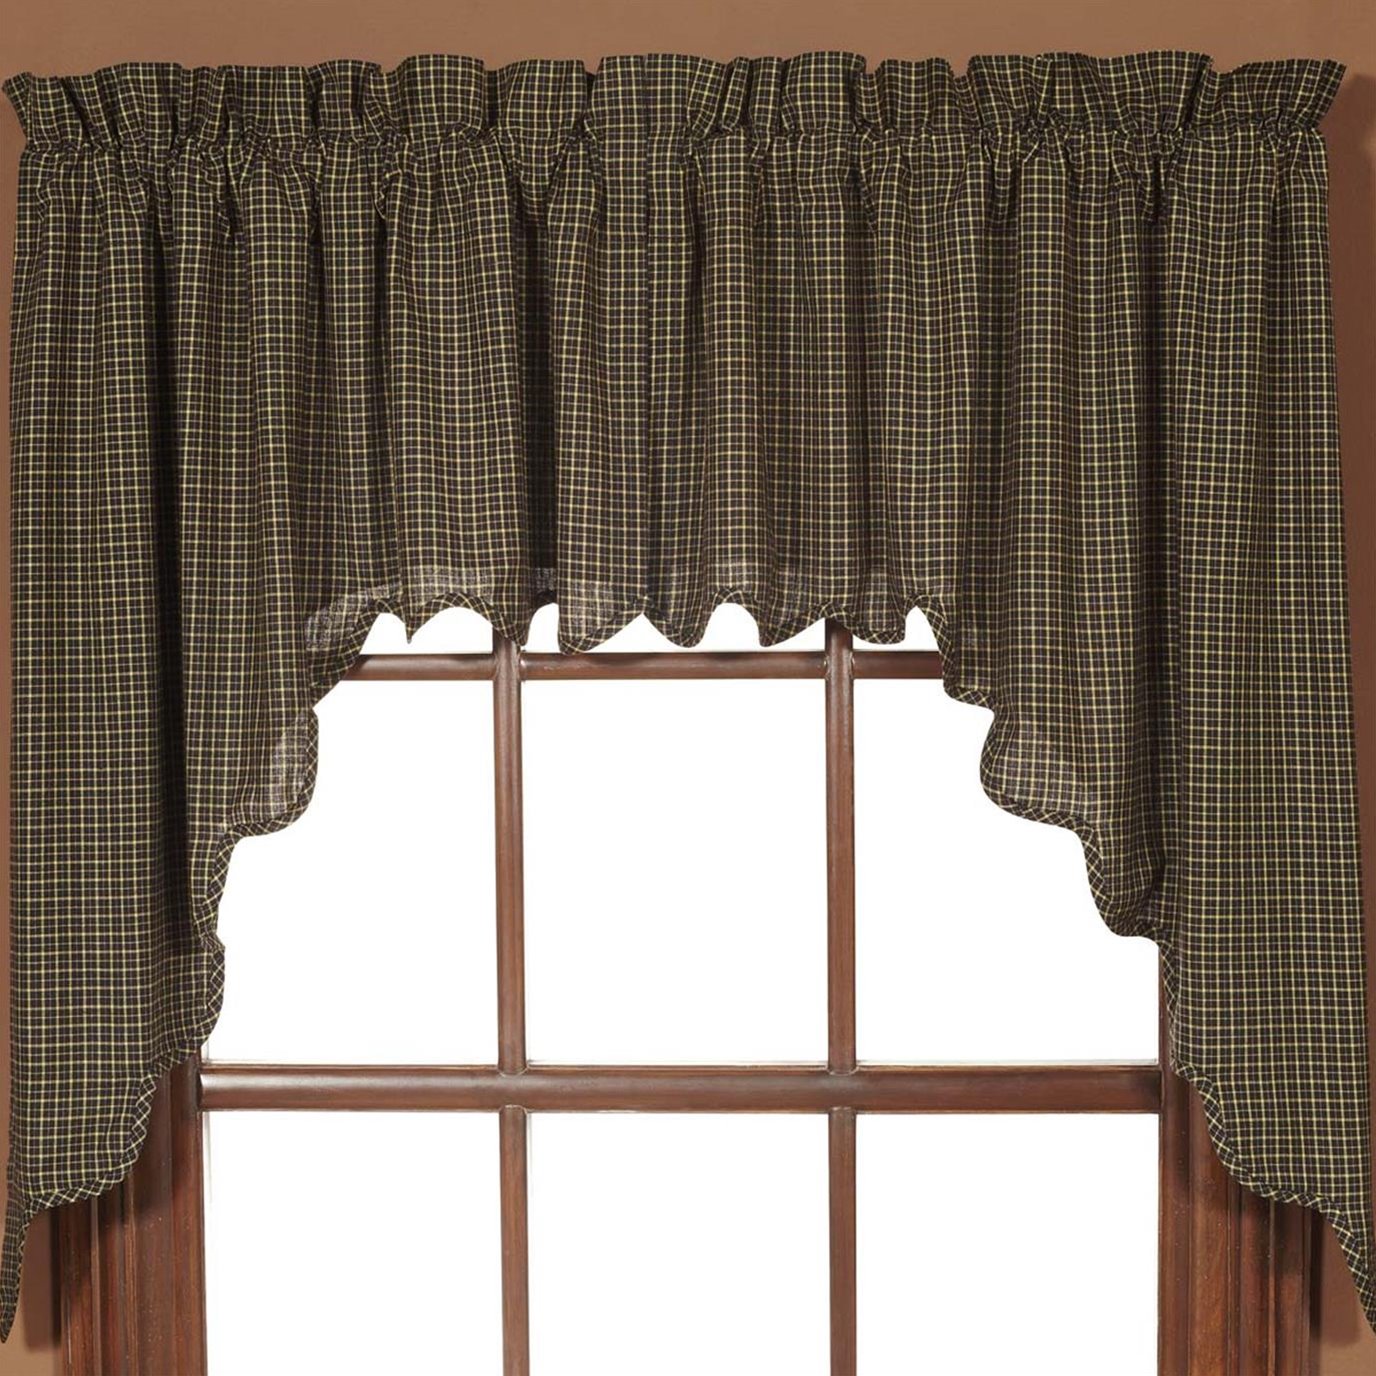 Kettle Grove Plaid Swag Scalloped Set of 2 36x36x16